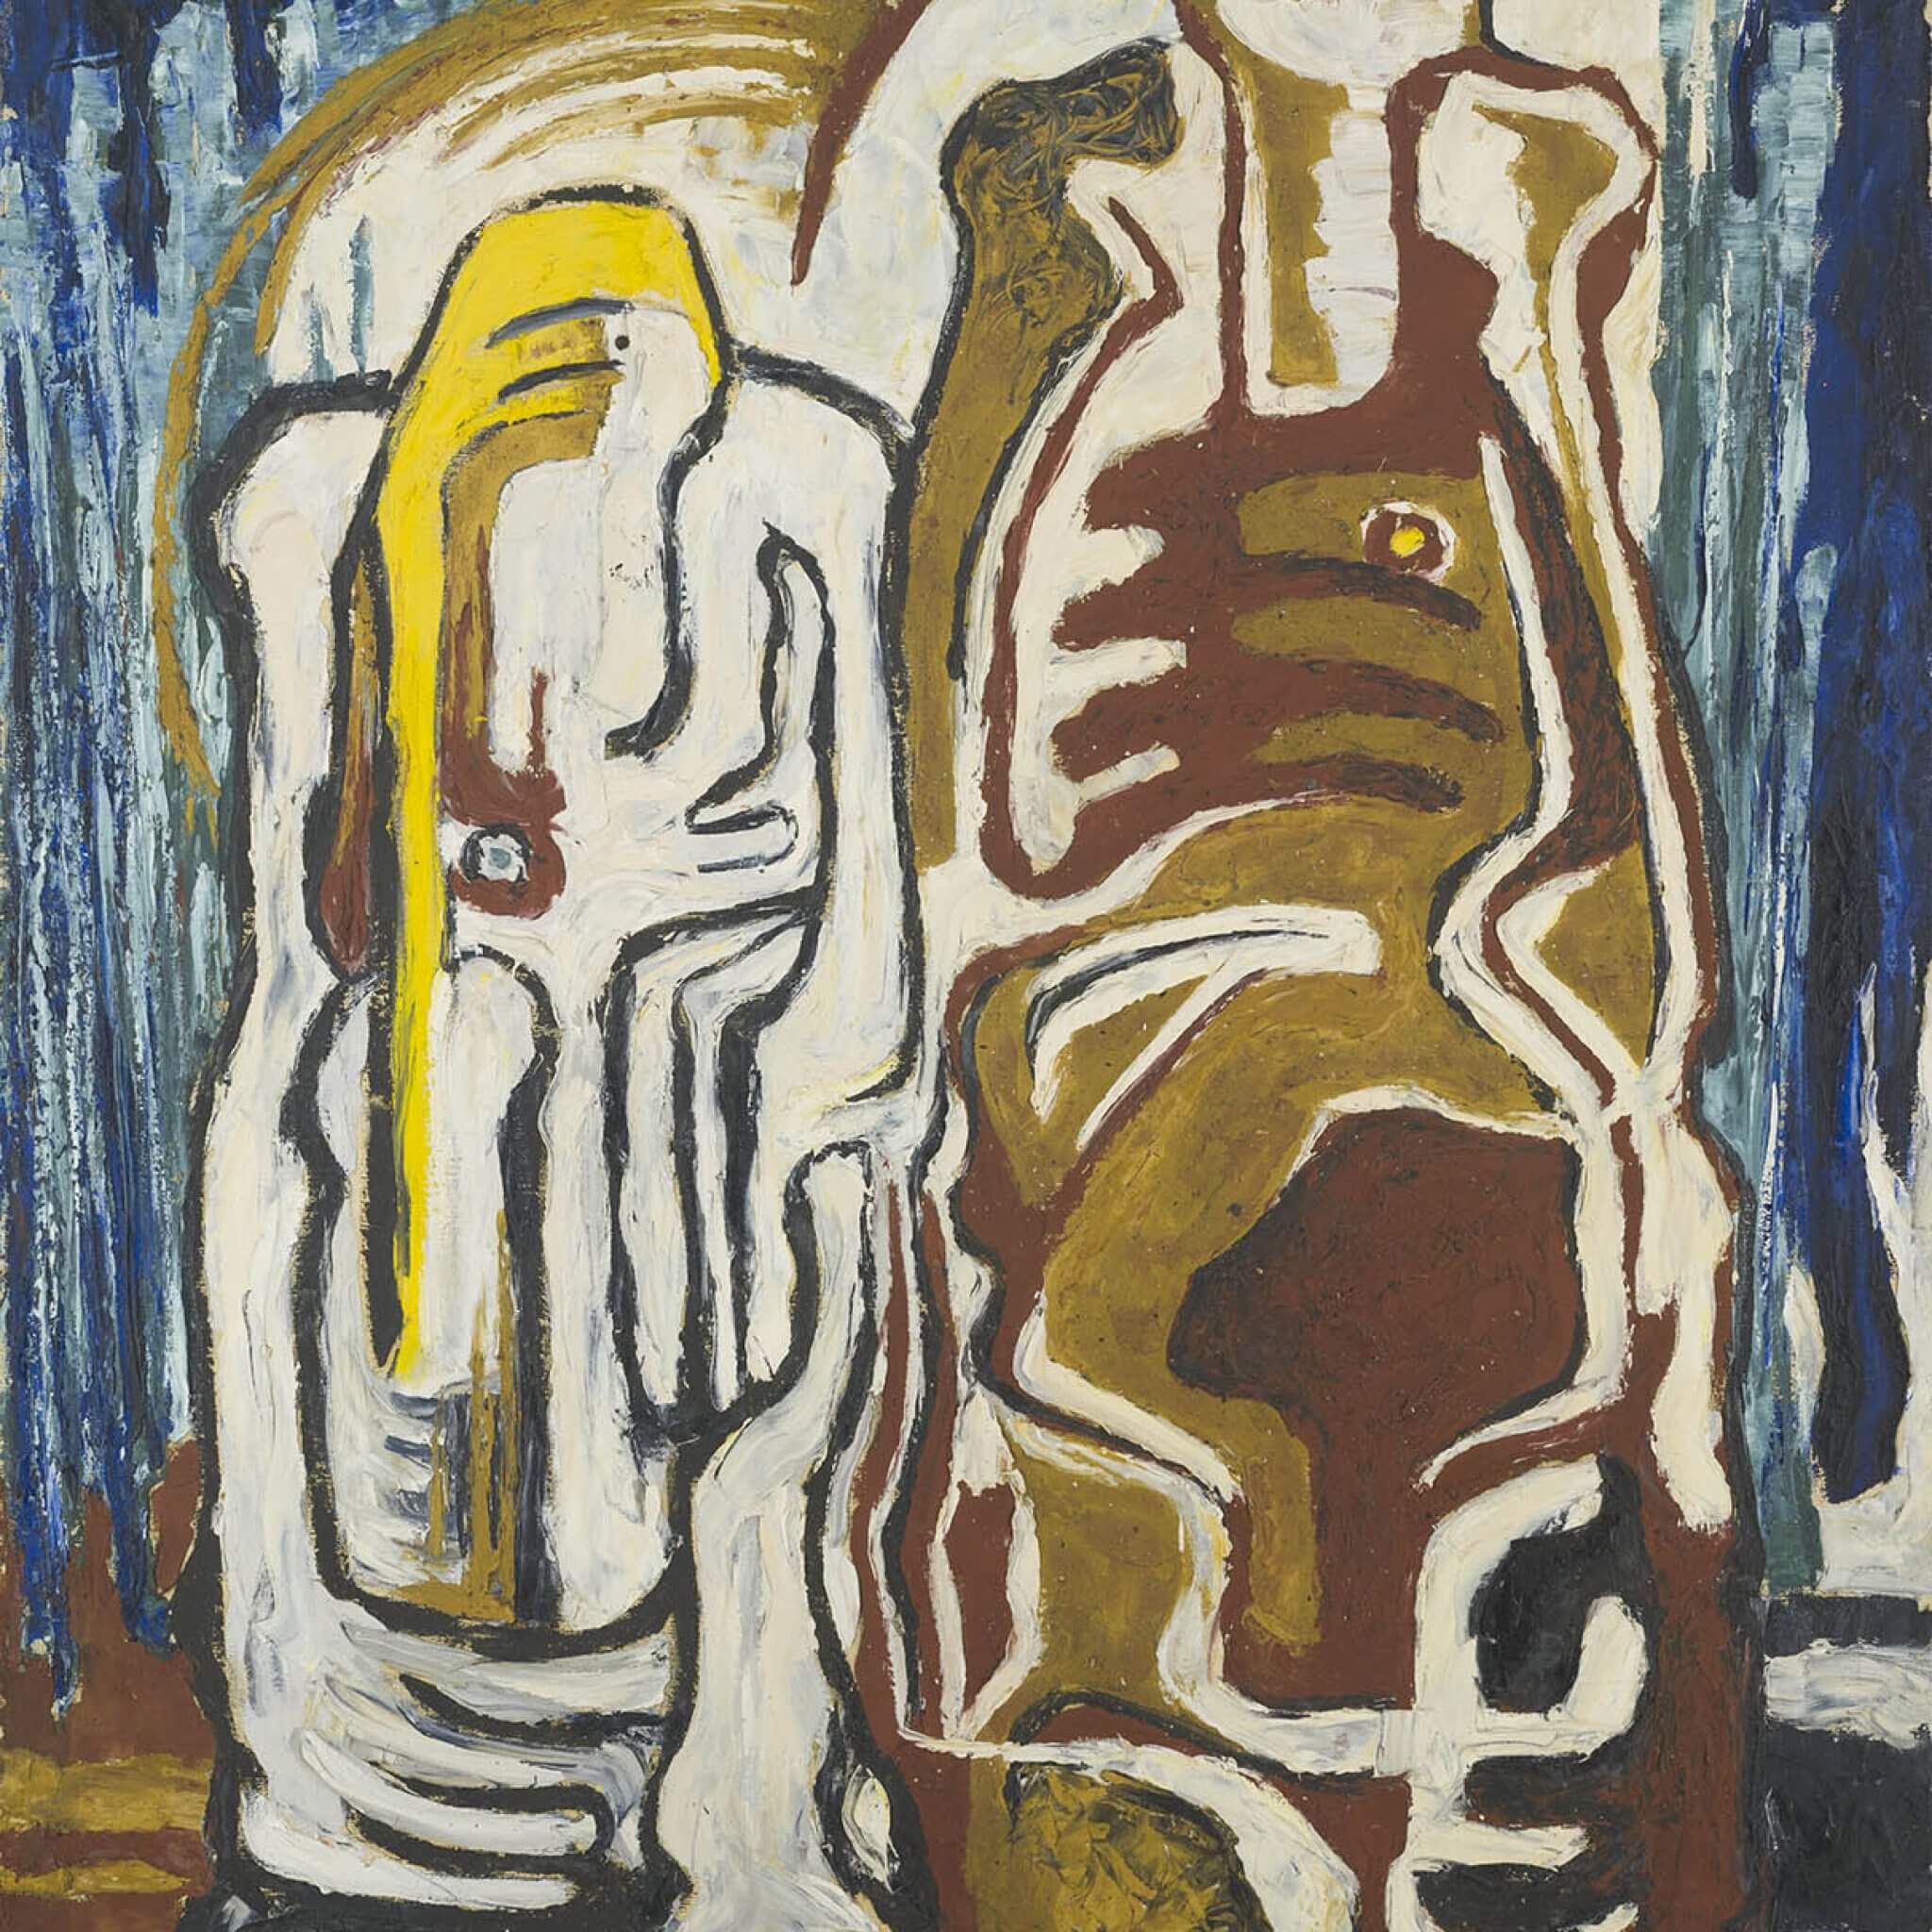 Abstract oil painting of two deconstructed human figures with ribs and other bones visible